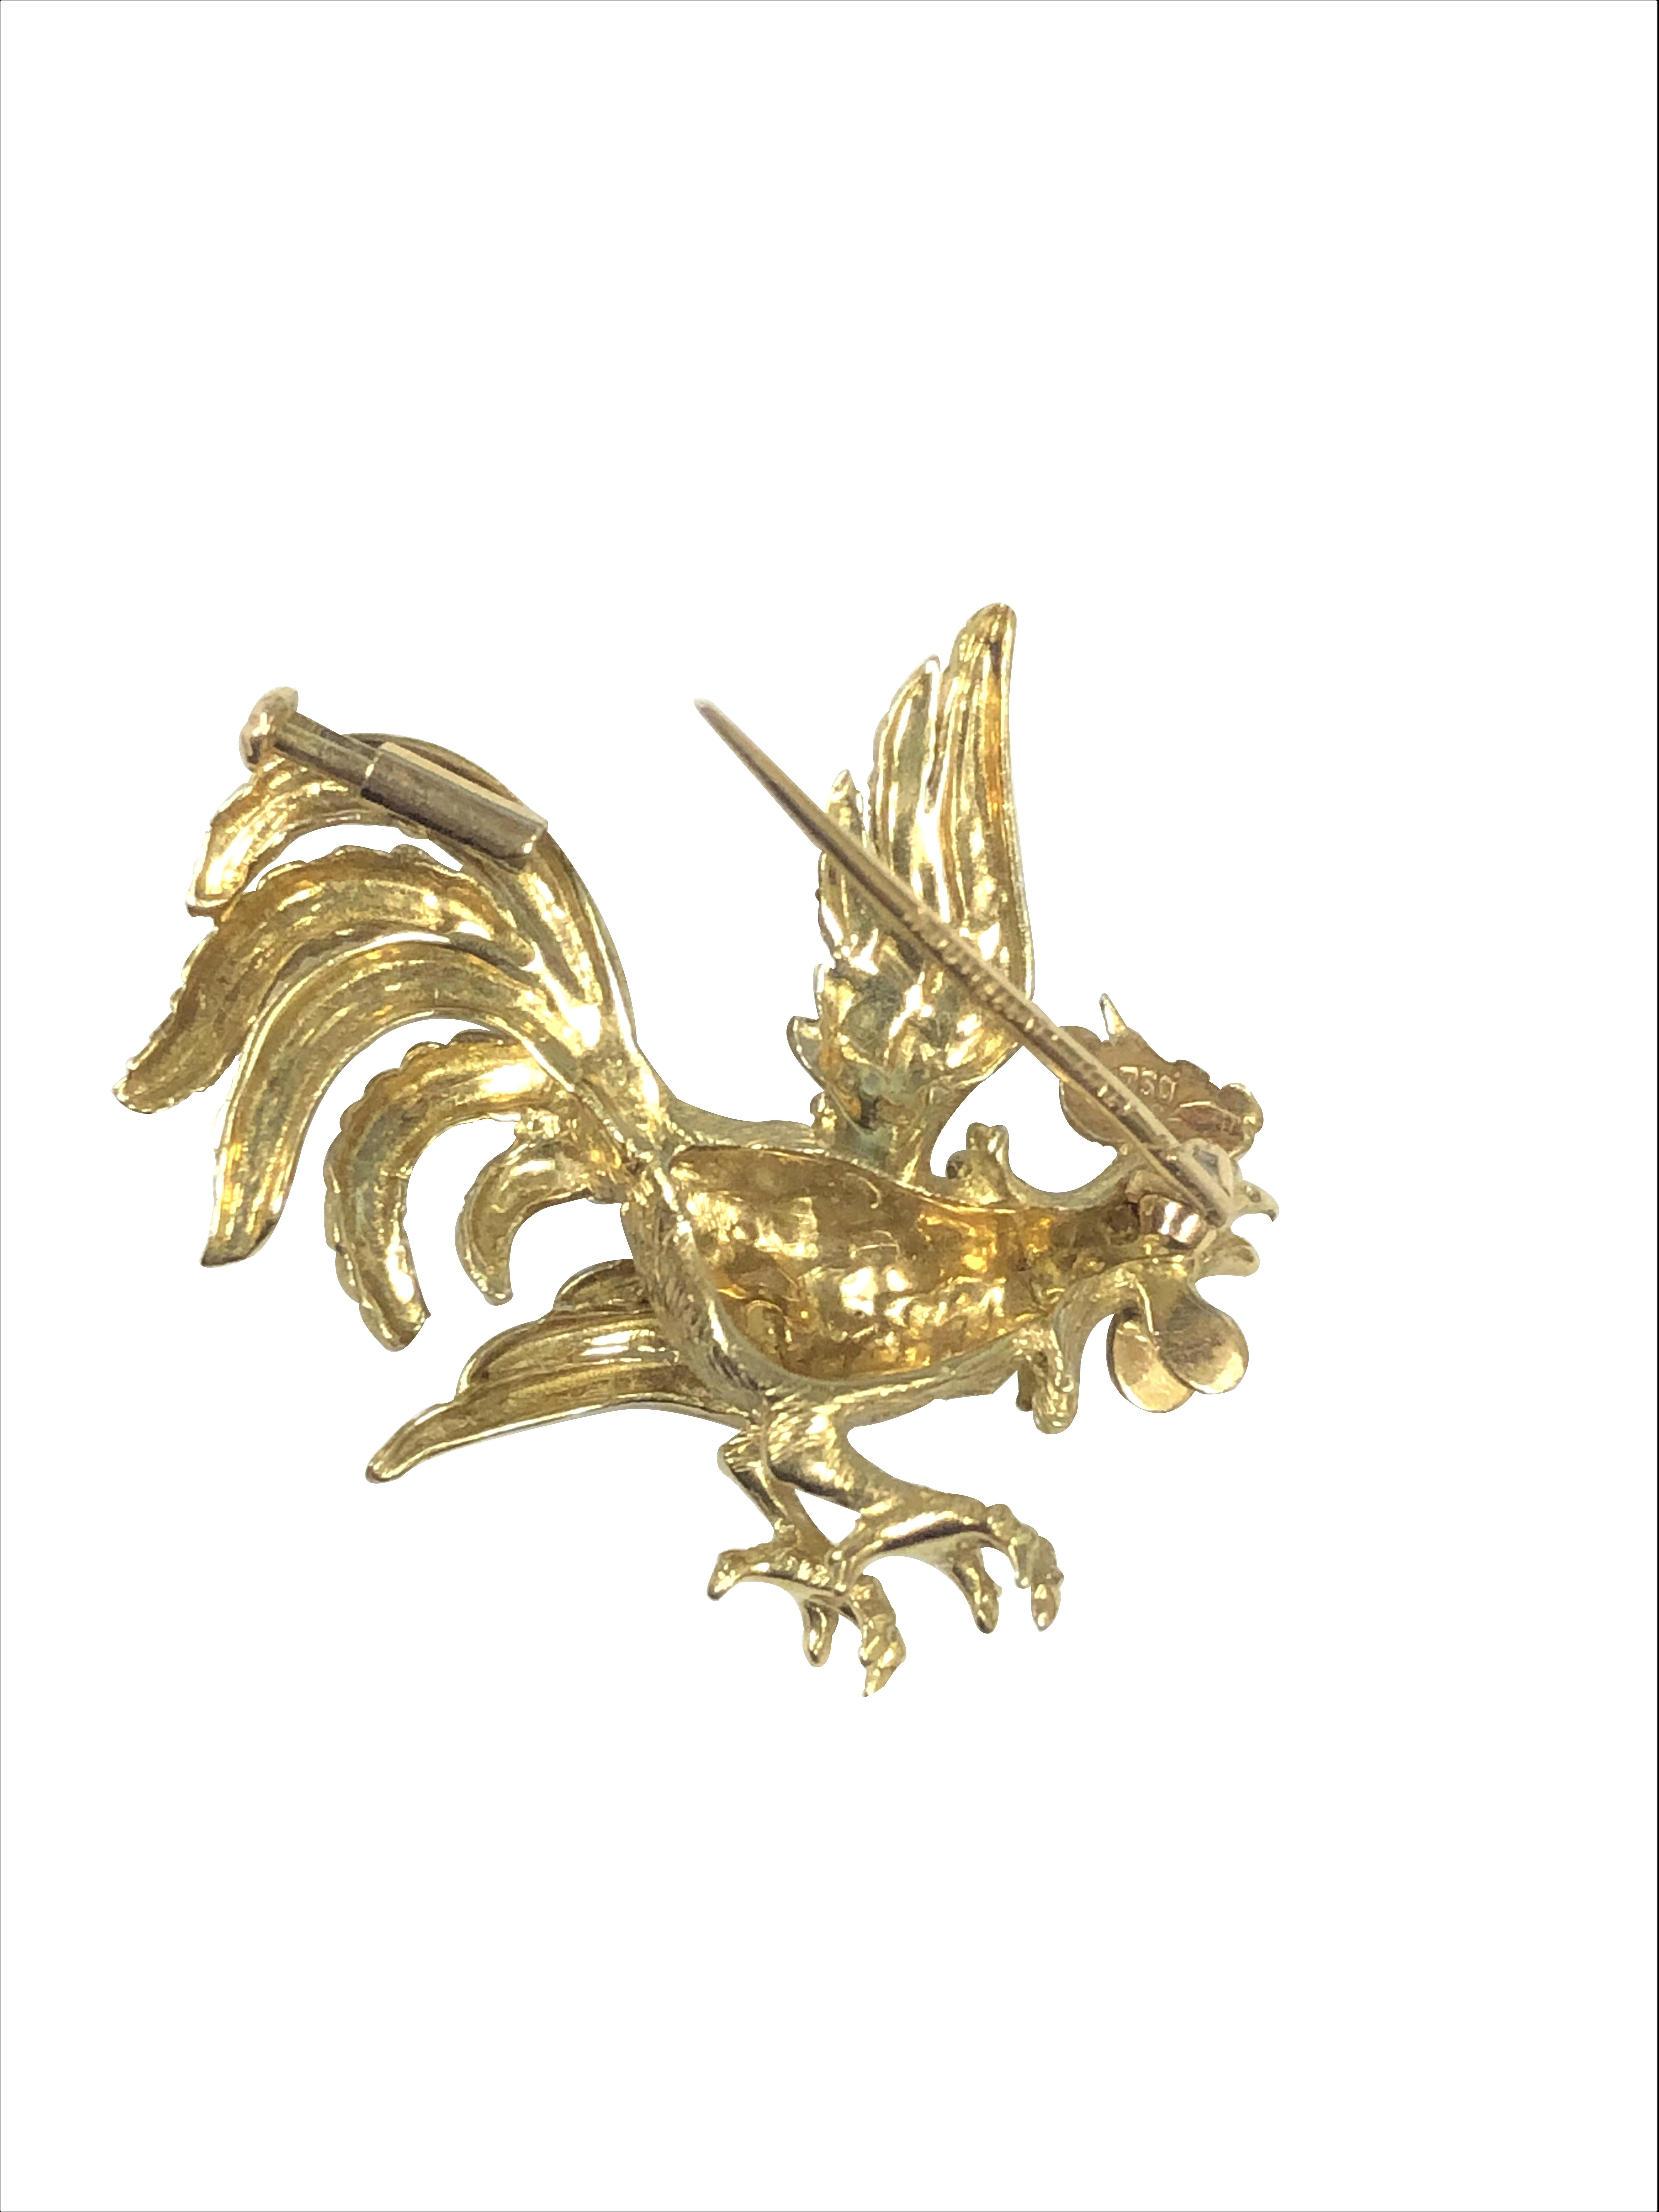 Circa 1980 Mario Buccellati 18K yellow Gold Rooster Brooch, measuring 1 3/8 X 1 1/4 inch and having hand finished texturing in the famous Buccellati style. Set with a Ruby Eye. excellent condition, comes in a Suede Buccellati pouch.